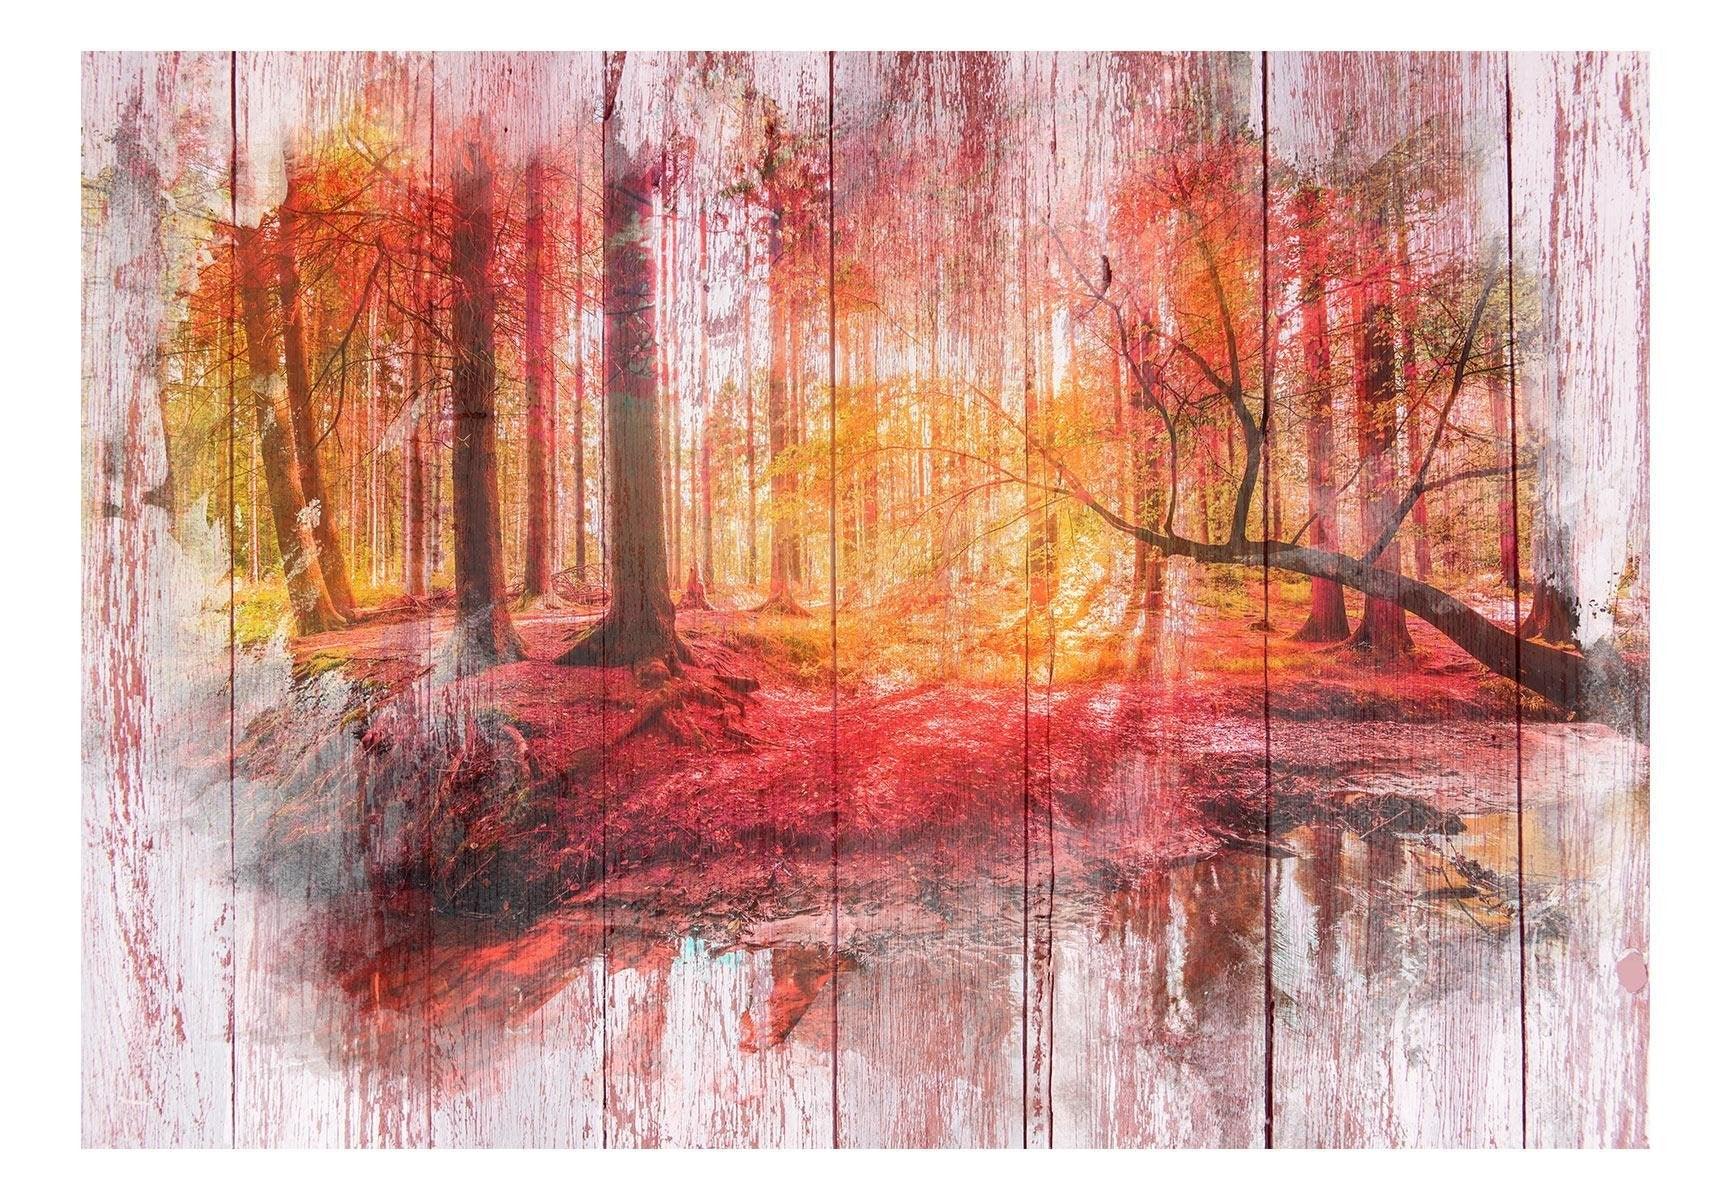 Peel and stick wall mural - Autumnal Forest - www.trendingbestsellers.com